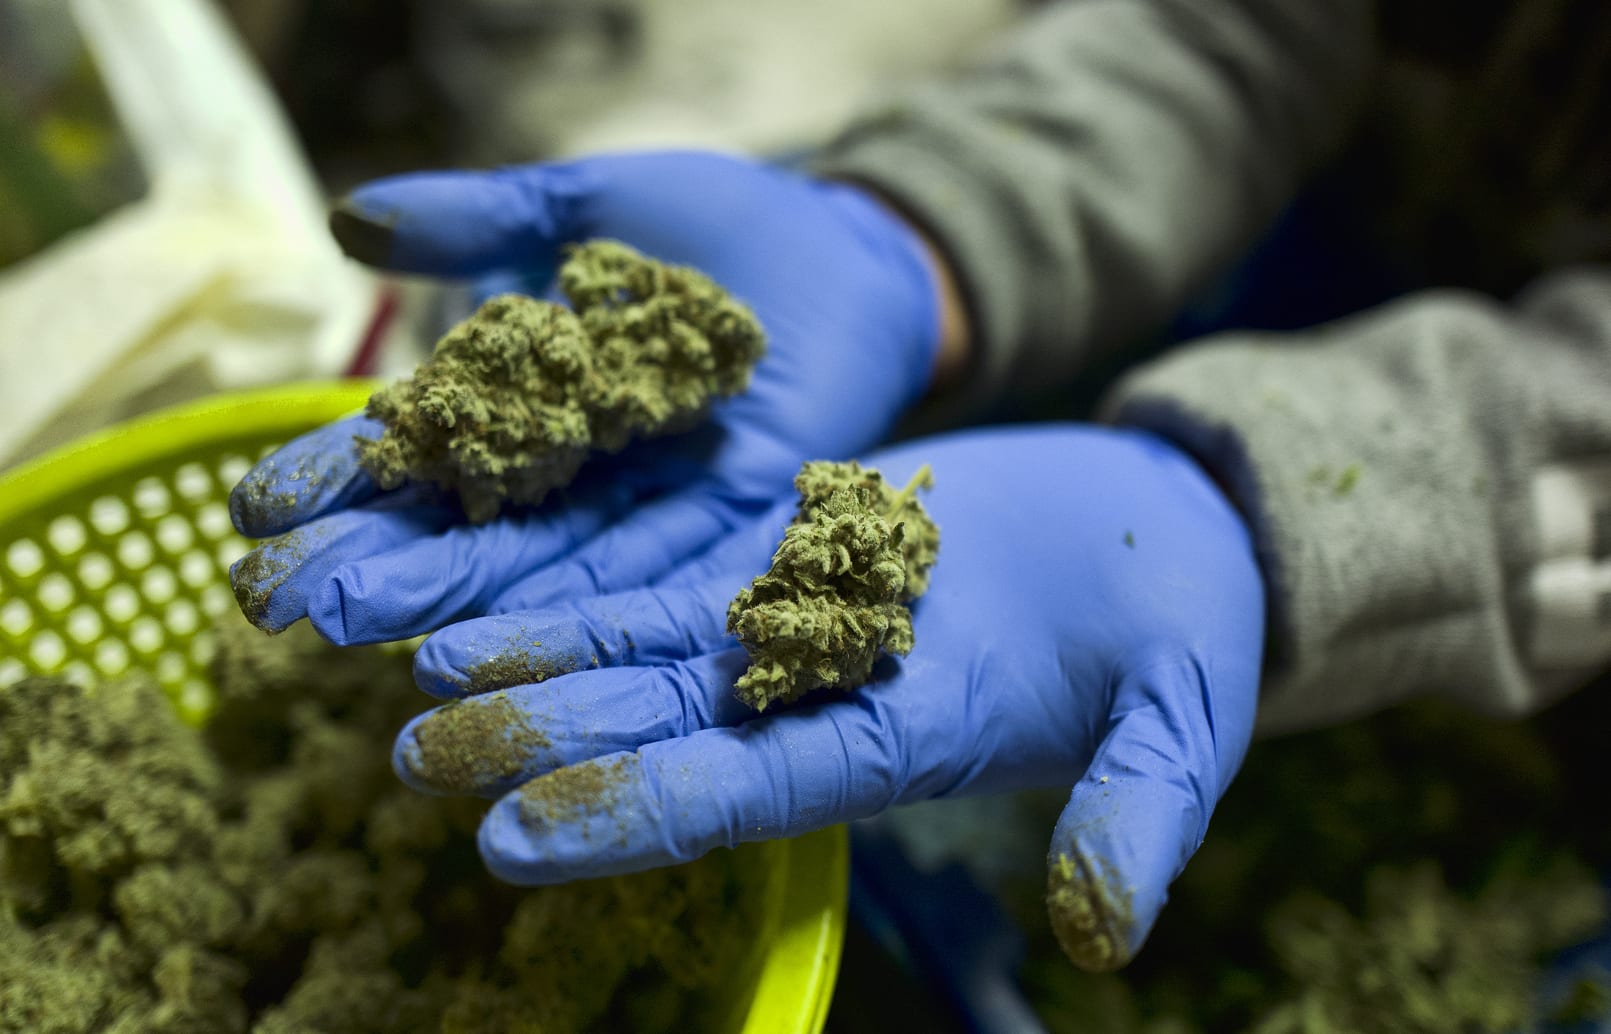 A cannabis worker displays fresh cannabis flower buds that have been trimmed for market in Gardena, California.